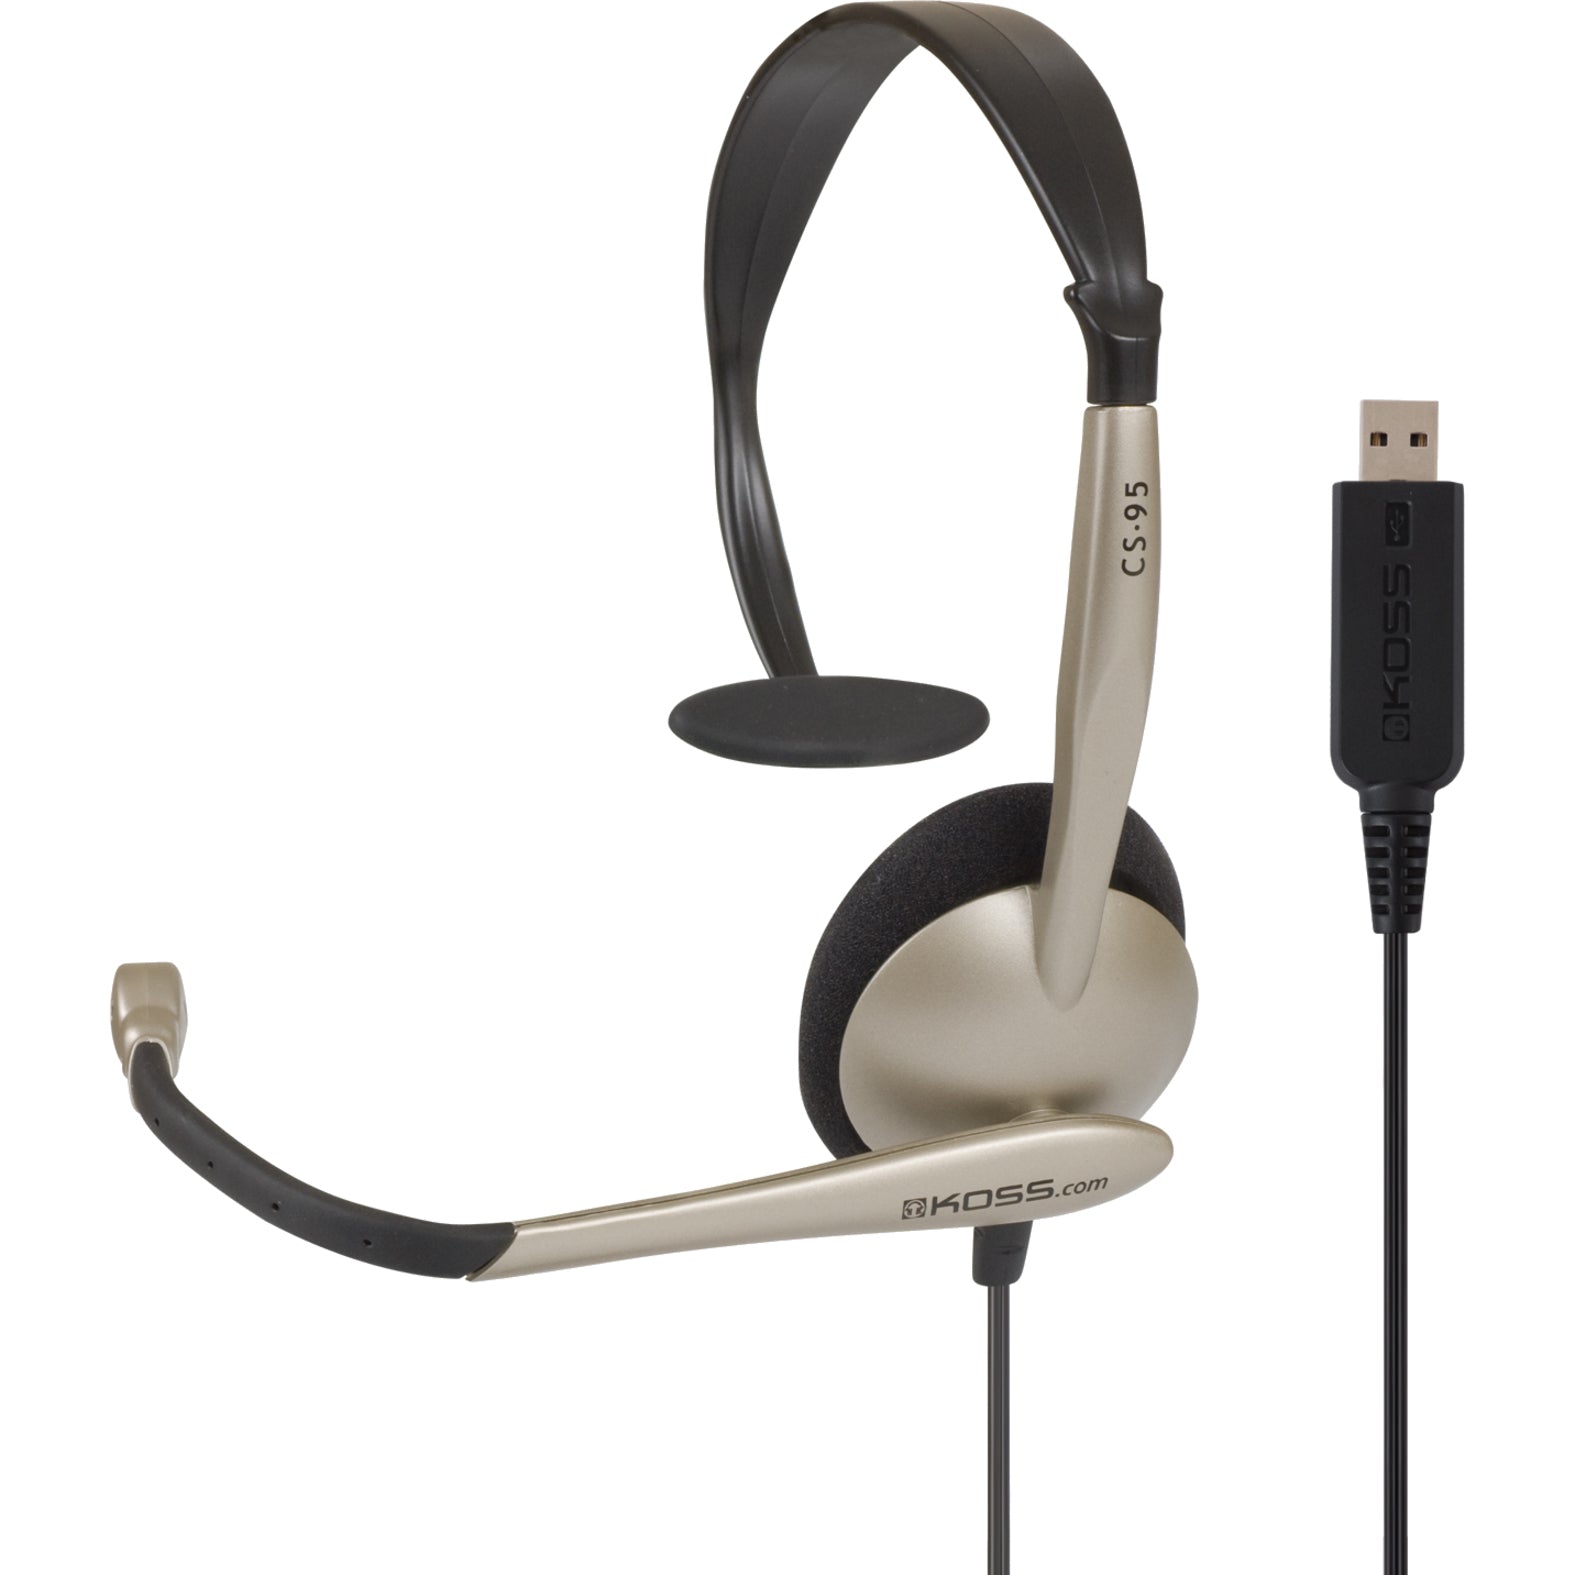 Koss 184060 CS95USB Headset, Monaural Over-the-head USB Wired Headset with Adjustable Headband and Noise Reduction